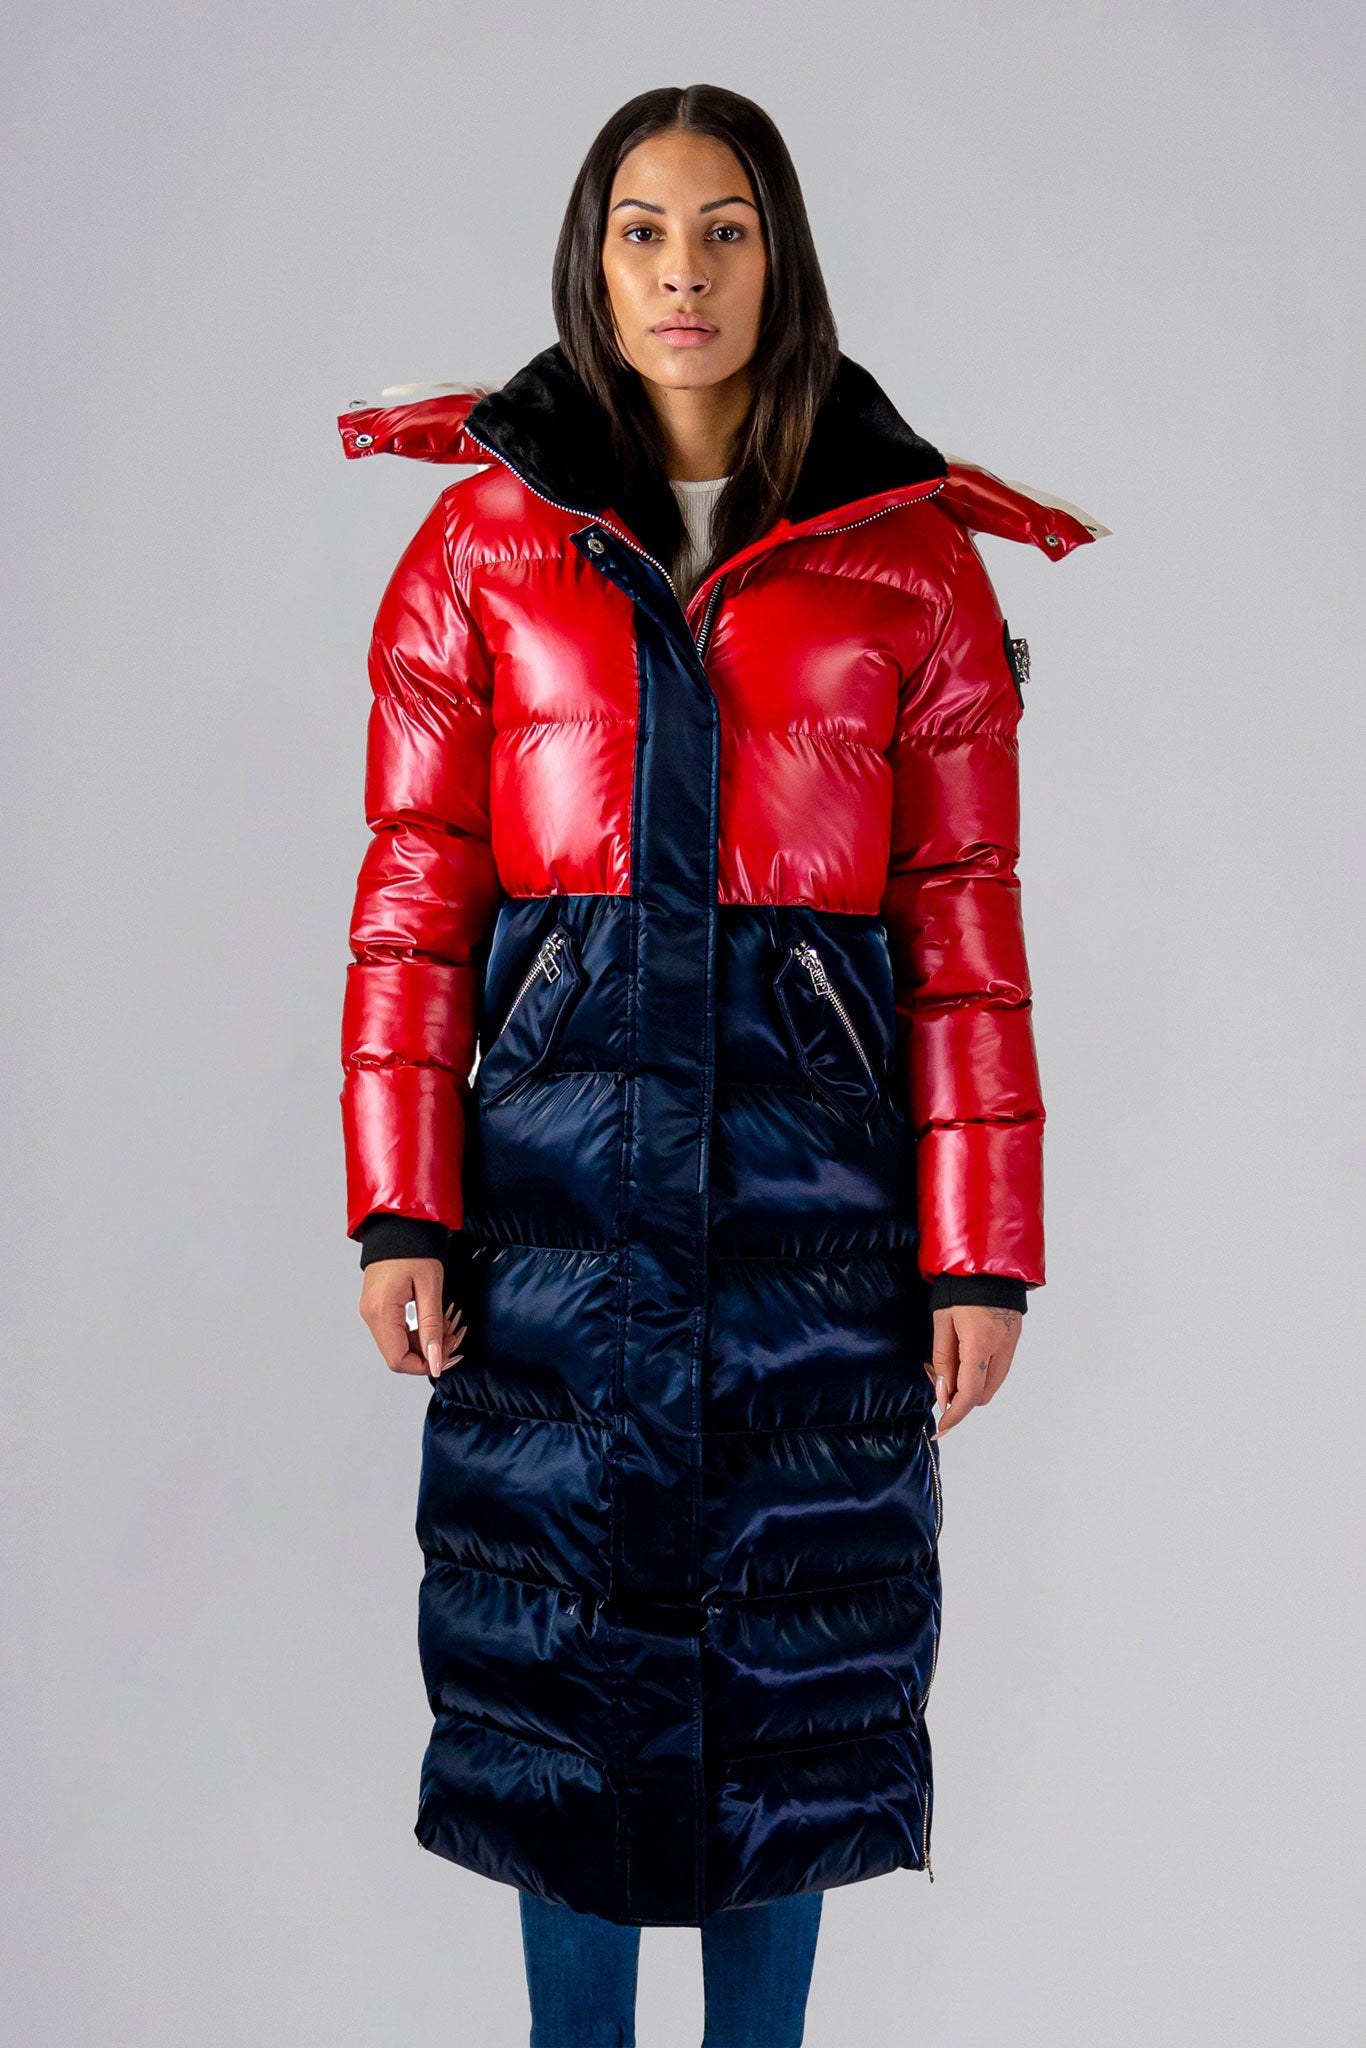 Woodpecker Women's Extra Long Bird of Paradise Winter coat. High-end Canadian designer winter coat for women in “Red White and Blue